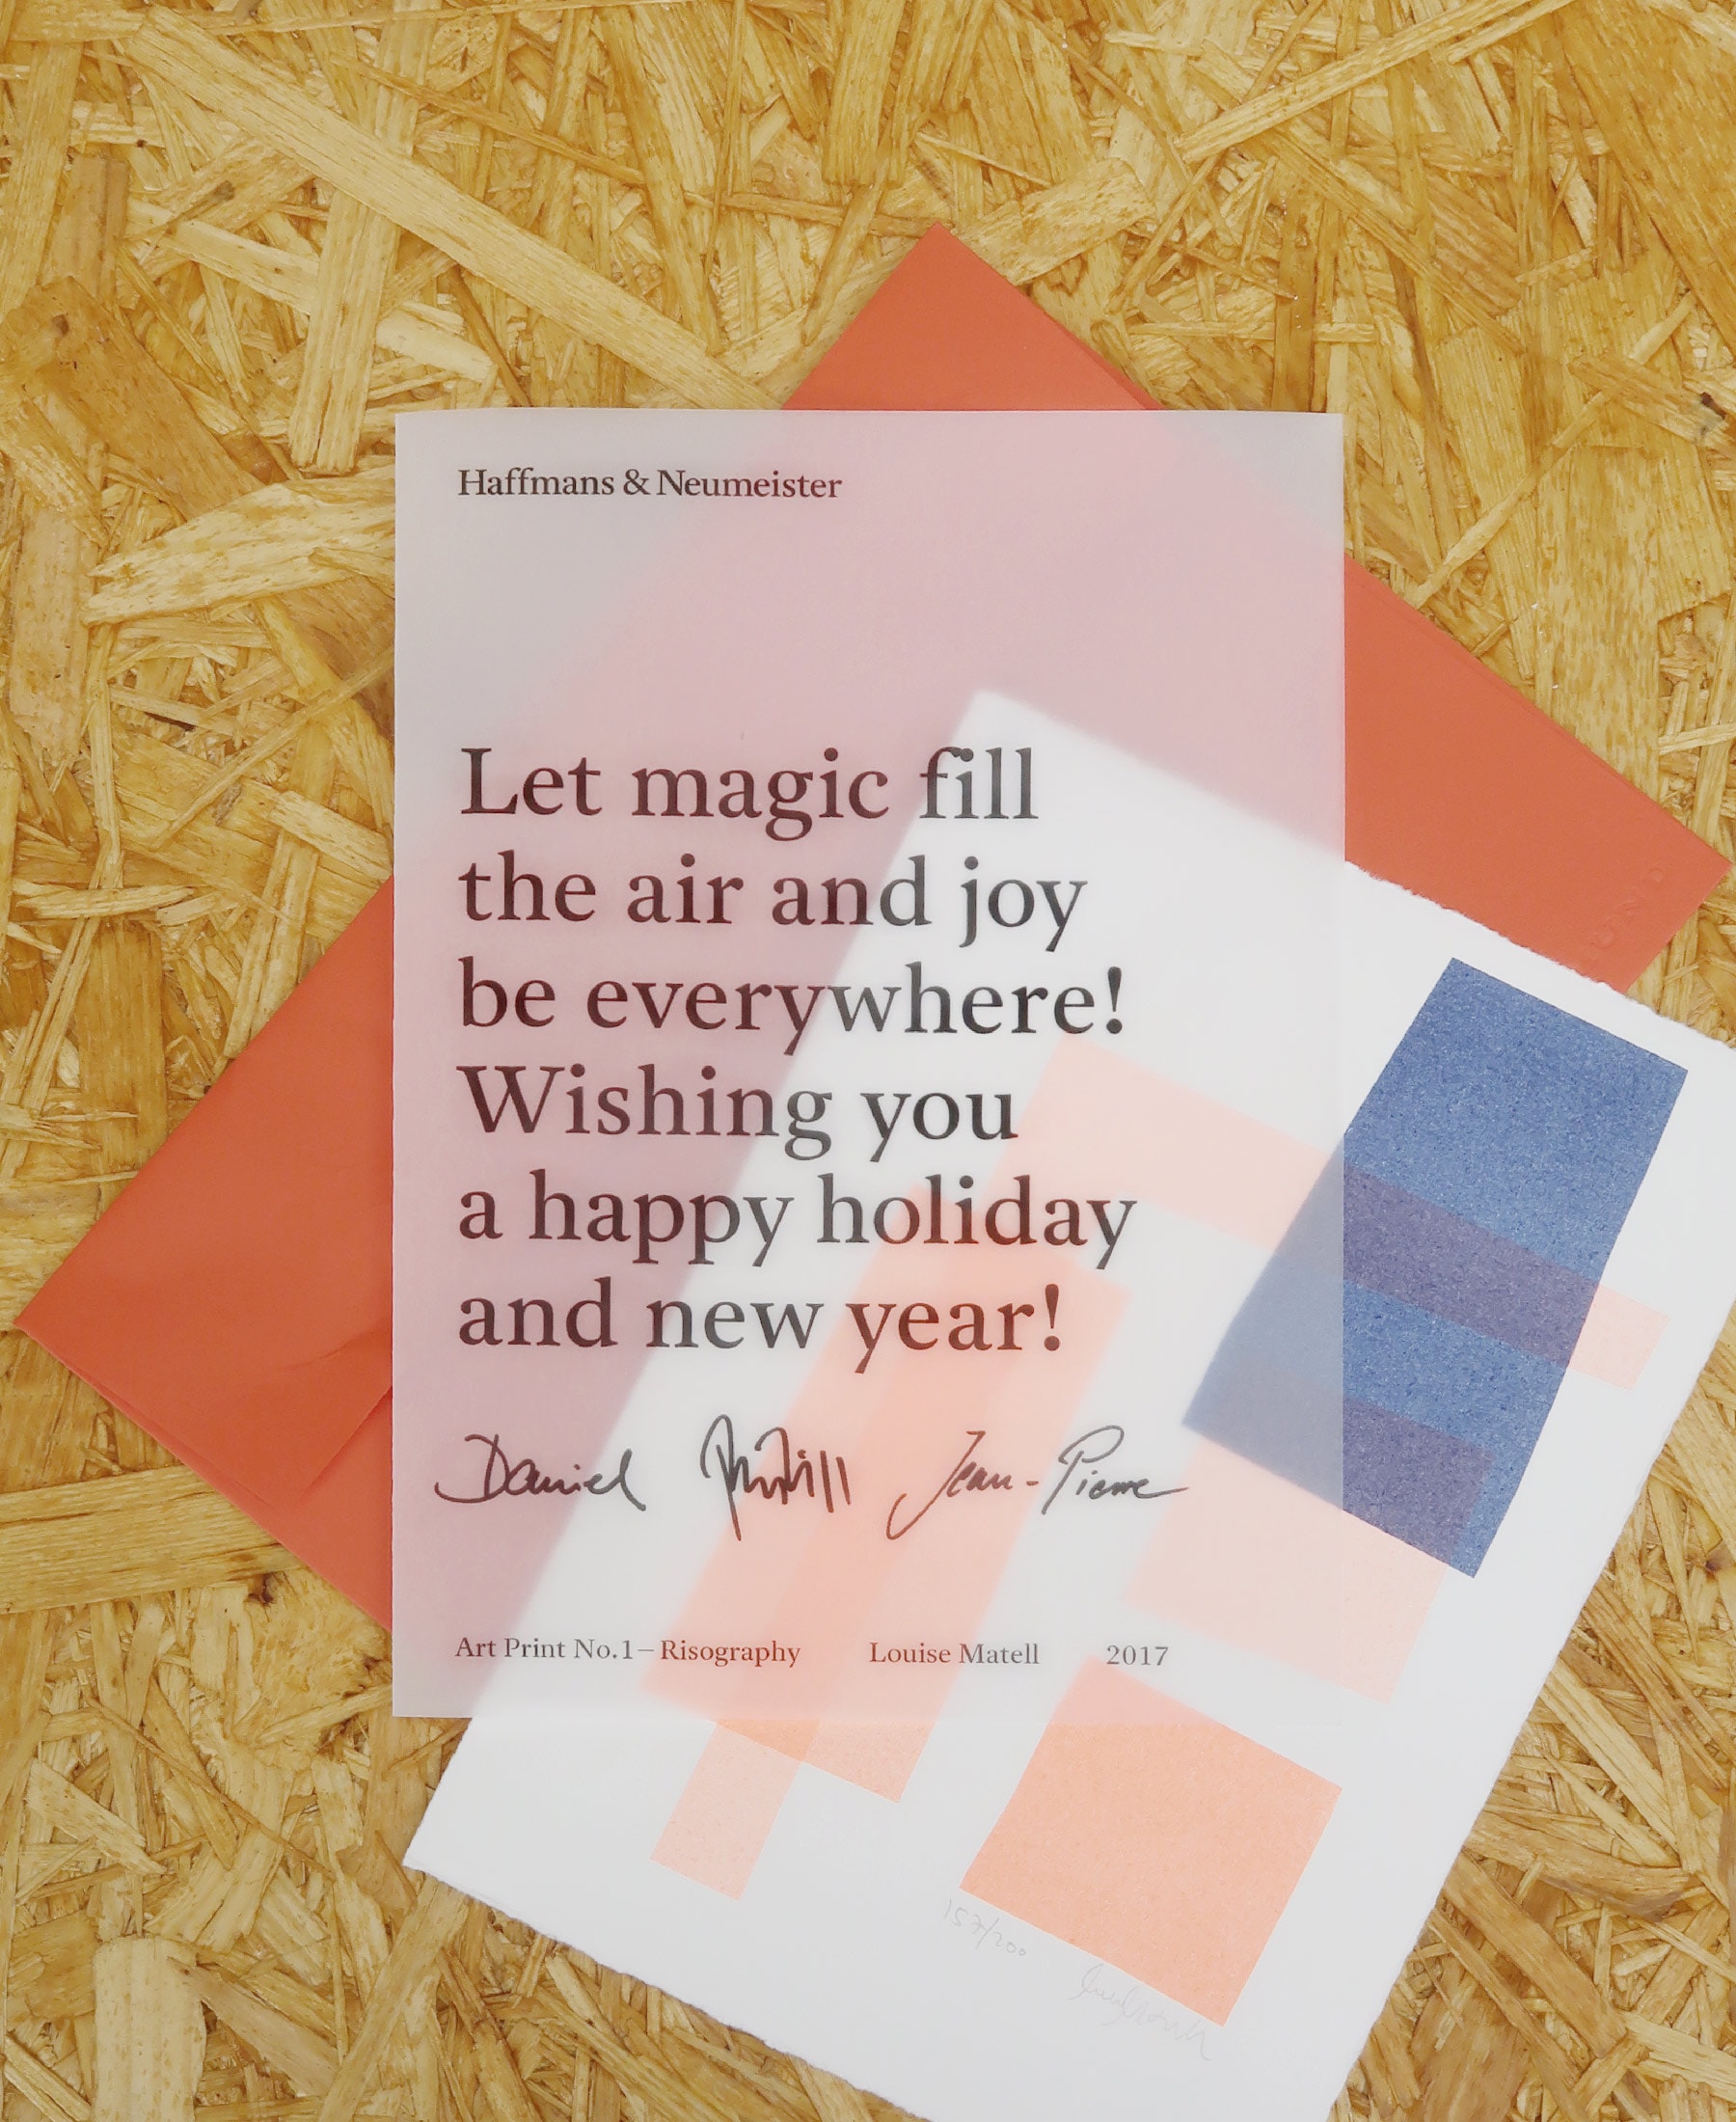 NewYearCard from Haffmans&Neumeister